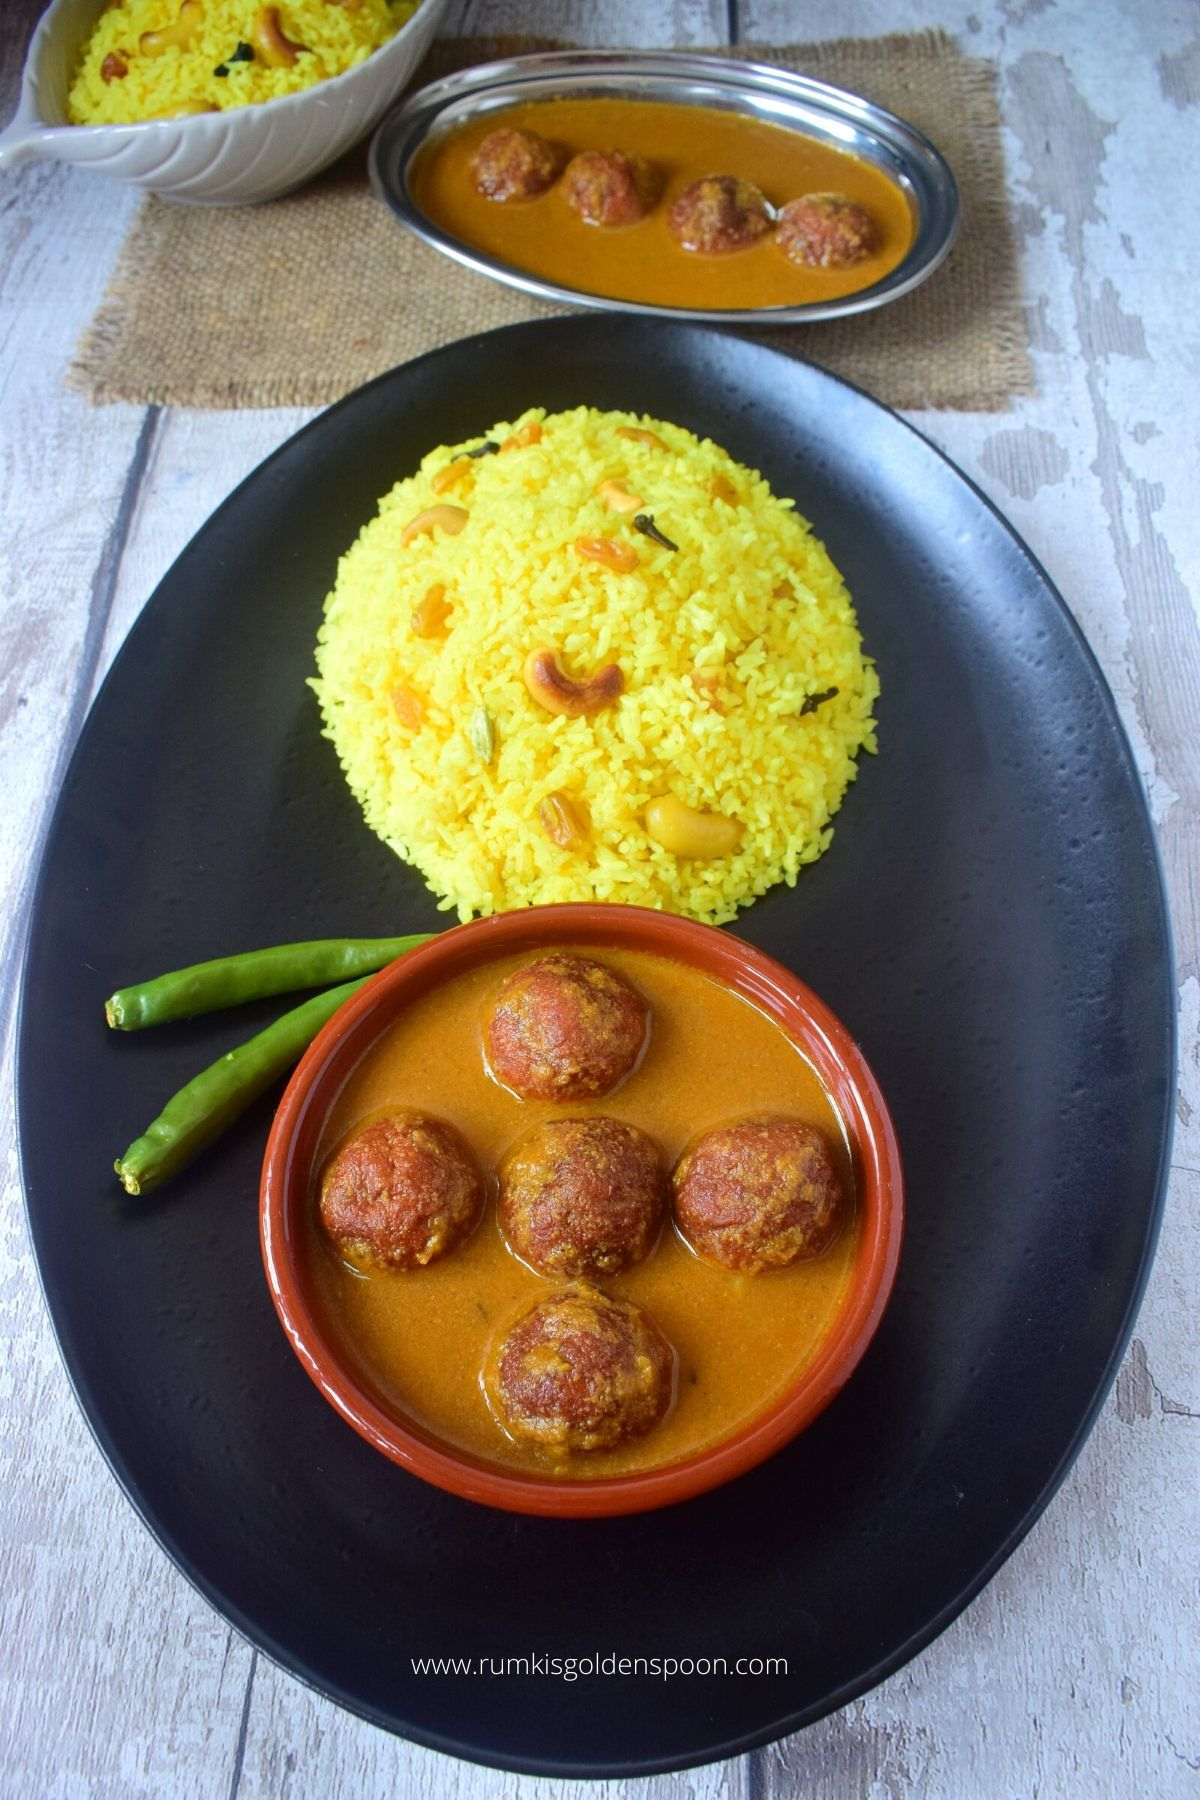 chanar kalia, chanar kalia recipe, chanar kalia bengali recipe, chanar kofta kalia, chanar kofta kalia recipe, Bengali cottage cheese curry, how to make chanar kalia, bengali recipe, bengali recipes, bengali food, bengali food recipes, recipes of bengali food, traditional bengali food, bengali recipes veg, niramish tarkari, niramish recipe, bengali traditional food, traditional food of Bengali, bengali veg recipe, bengali veg recipes, bengali vegetable recipe, bengali vegetarian recipe, Rumki's Golden Spoon